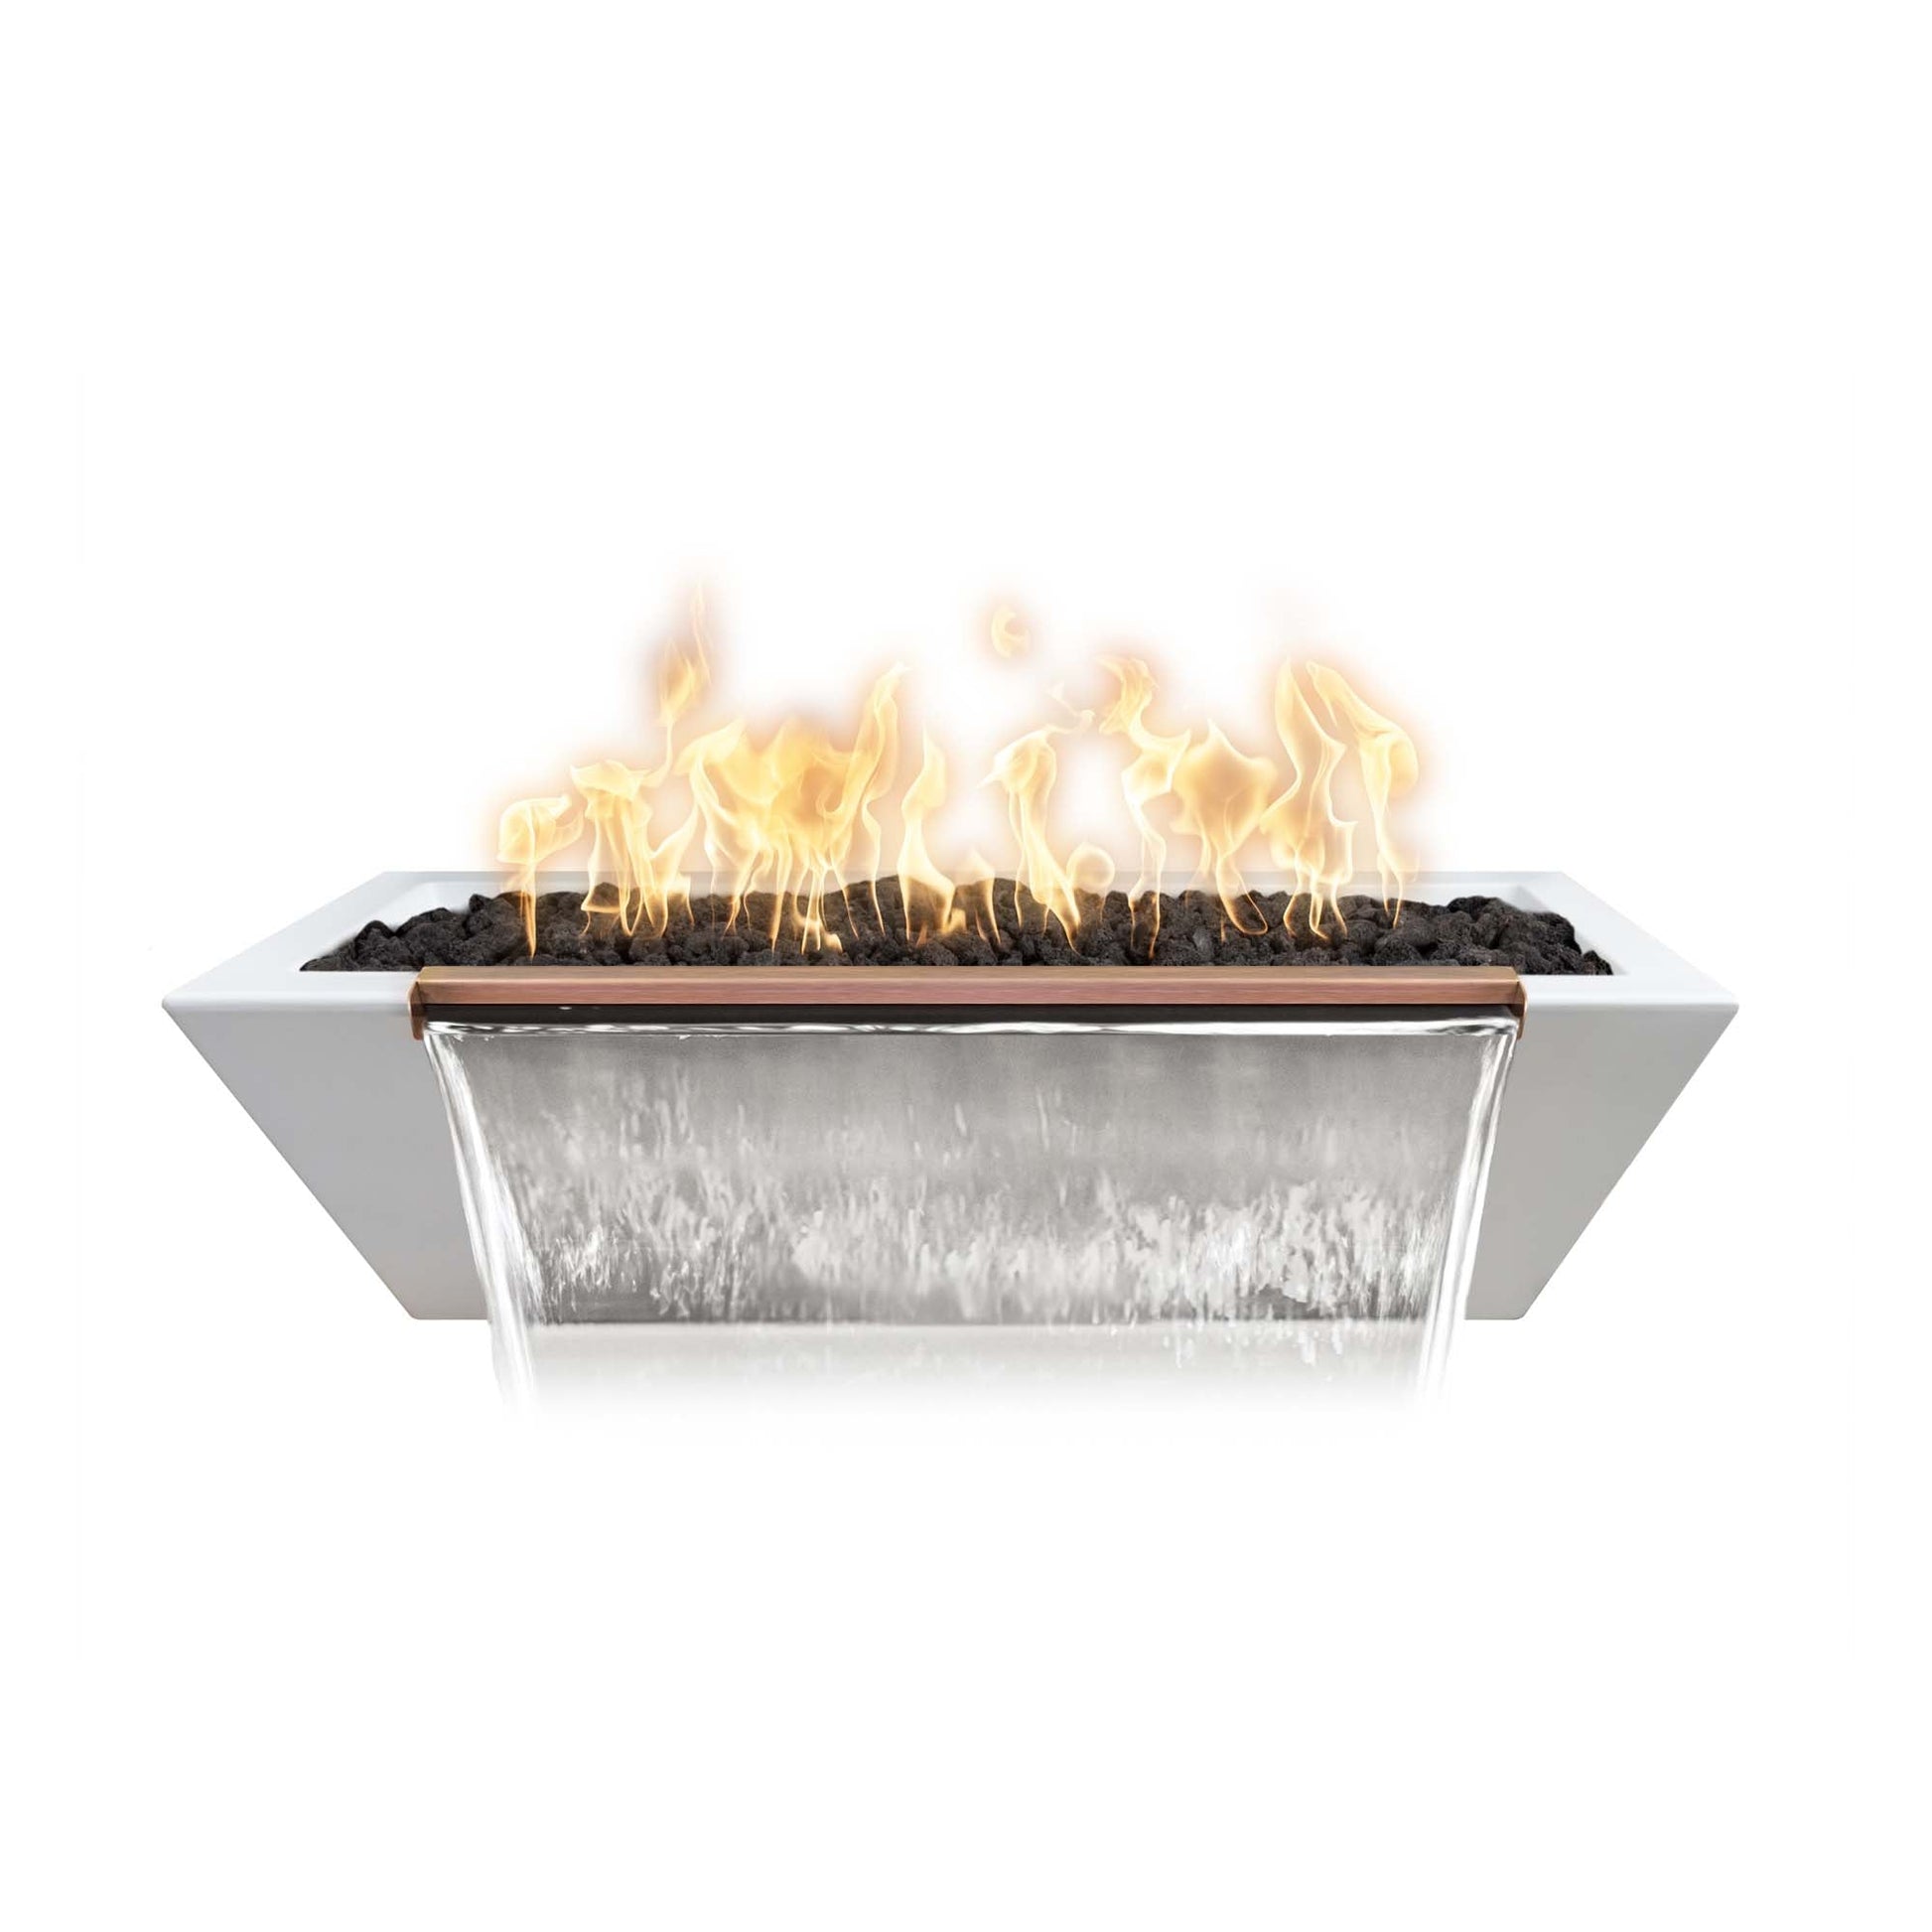 The Outdoor Plus Linear Maya 60" Rustic White GFRC Concrete Liquid Propane Fire & Water Bowl with Match Lit with Flame Sense Ignition